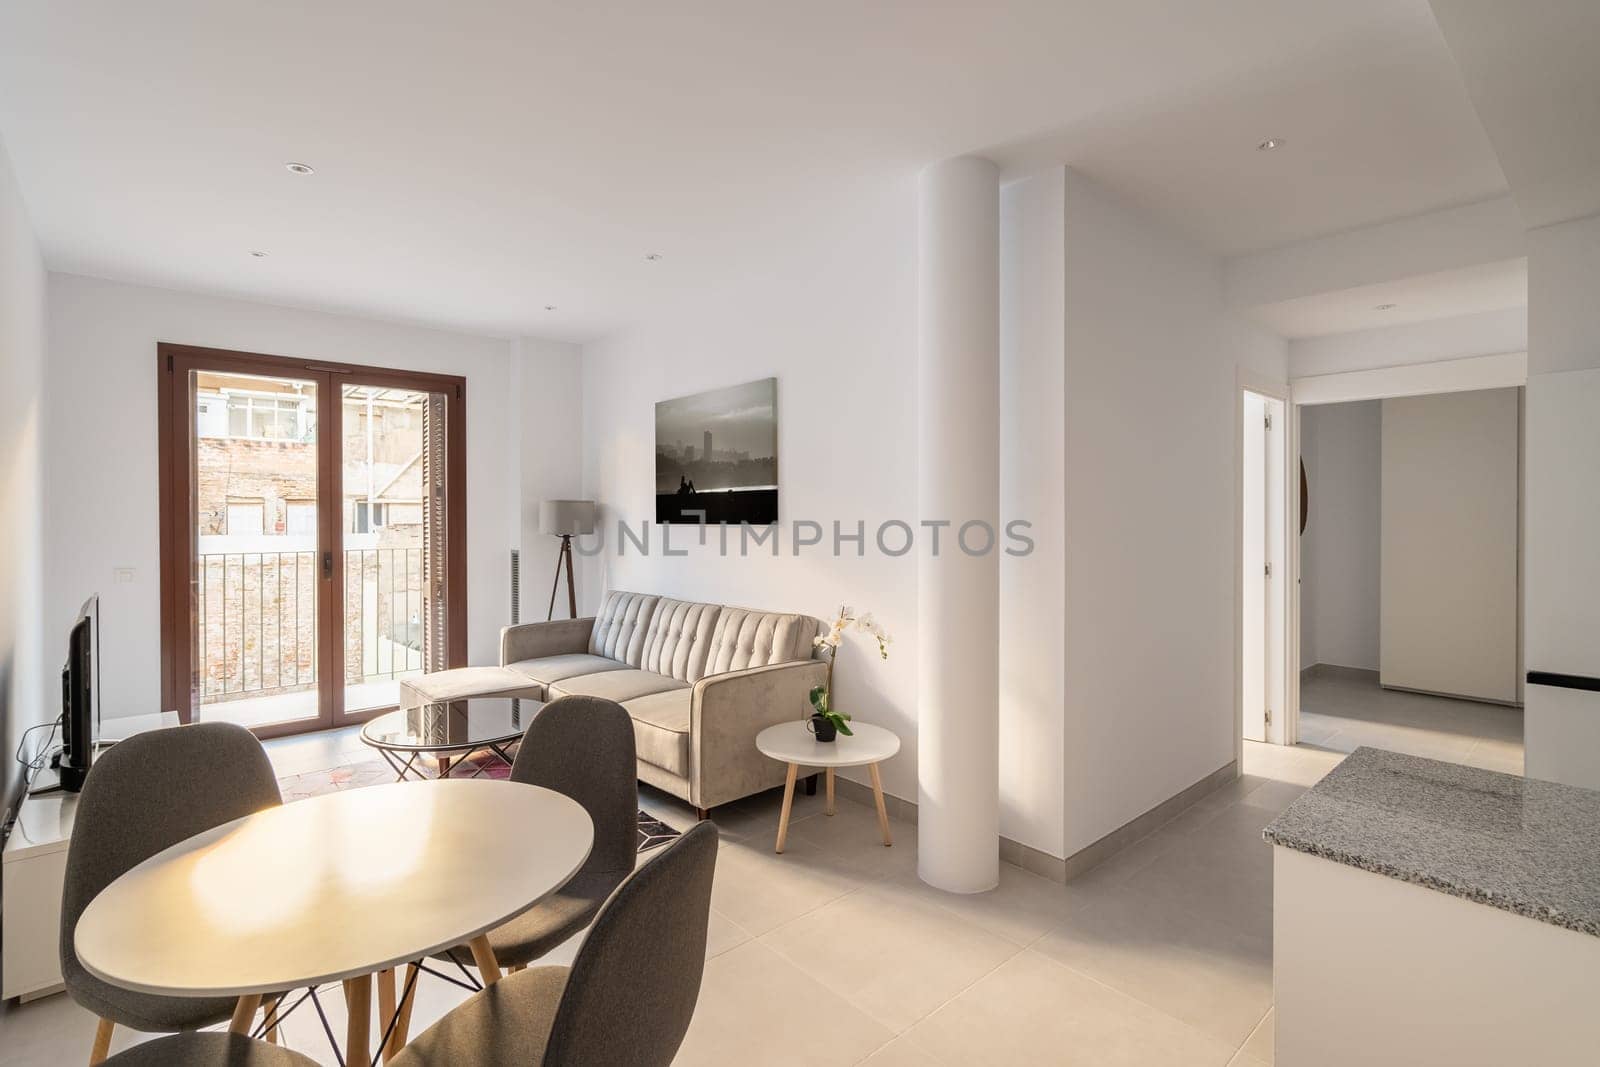 Spacious living-dining room with table and chairs, sofa, table and TV and decorative accessories with panoramic window and access to the balcony. Studio apartment concept.